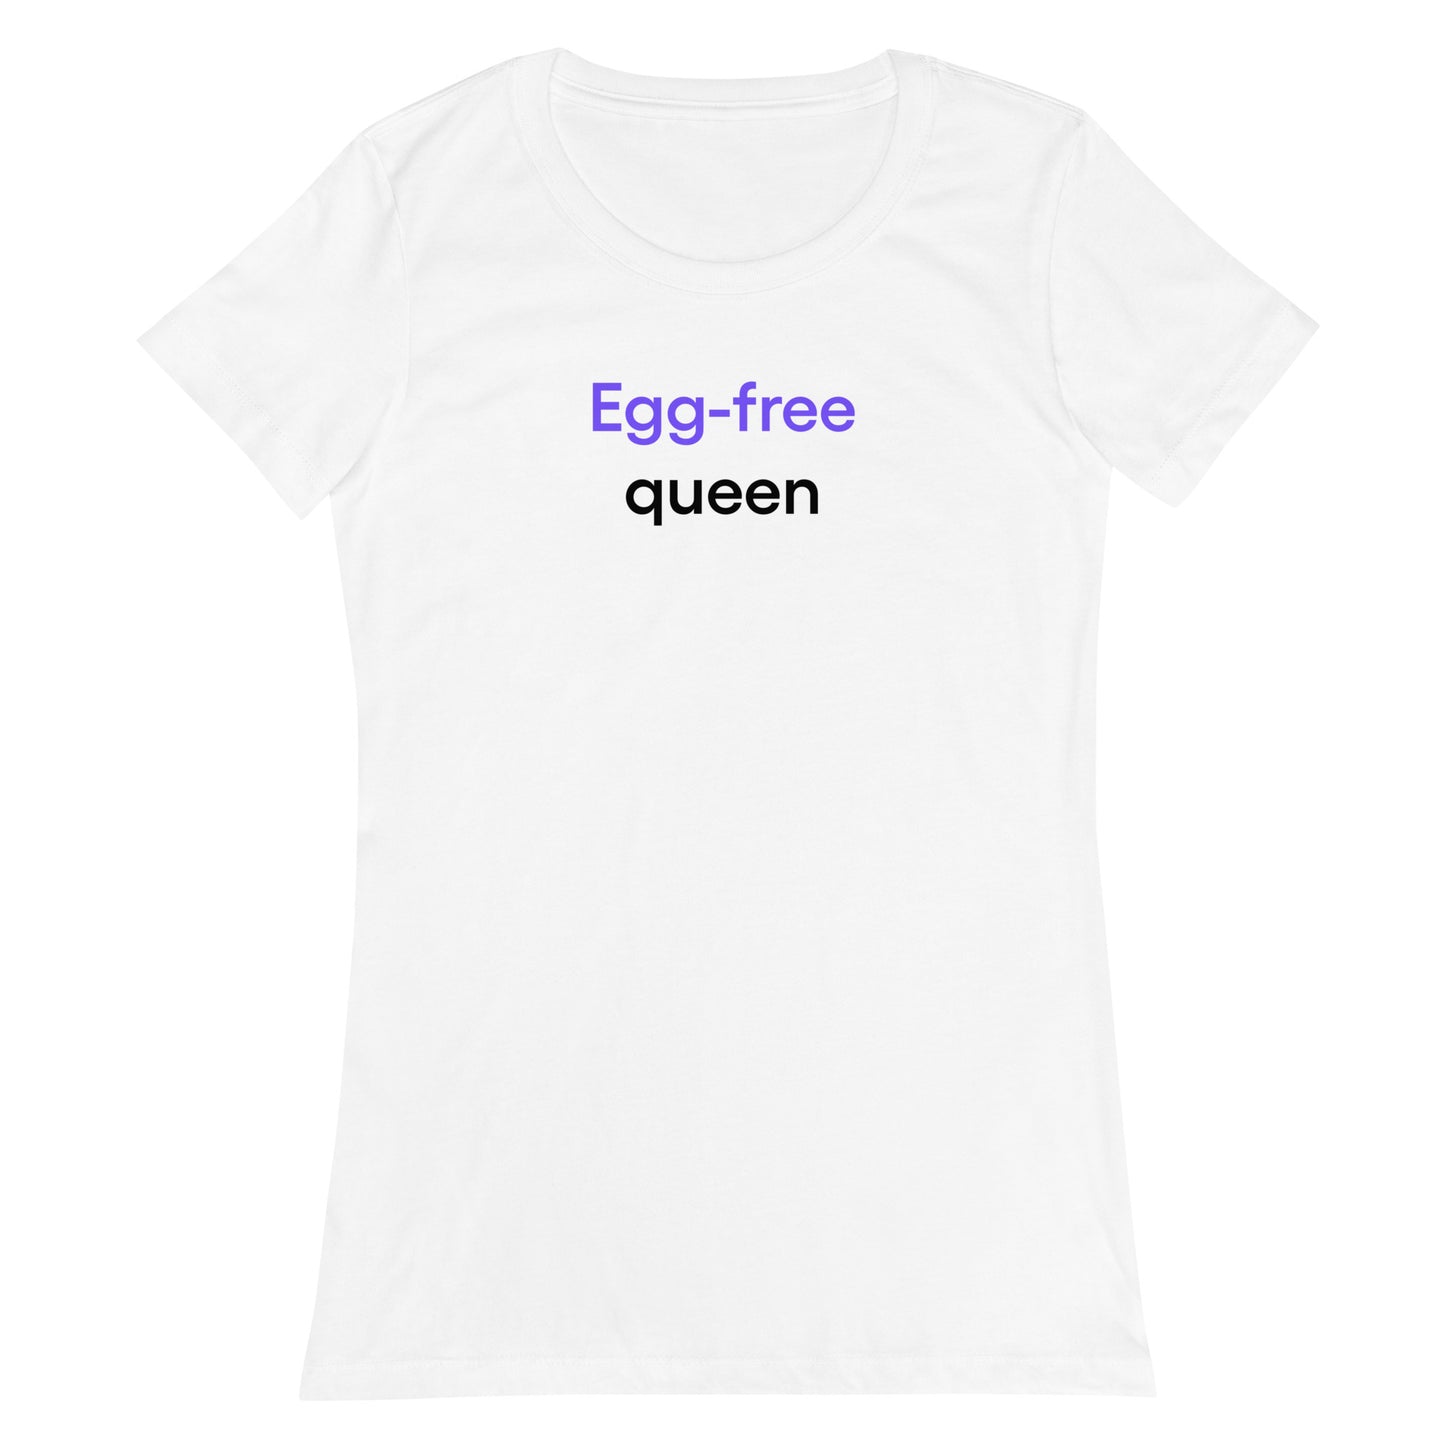 Egg-free queen | Women’s fitted t-shirt